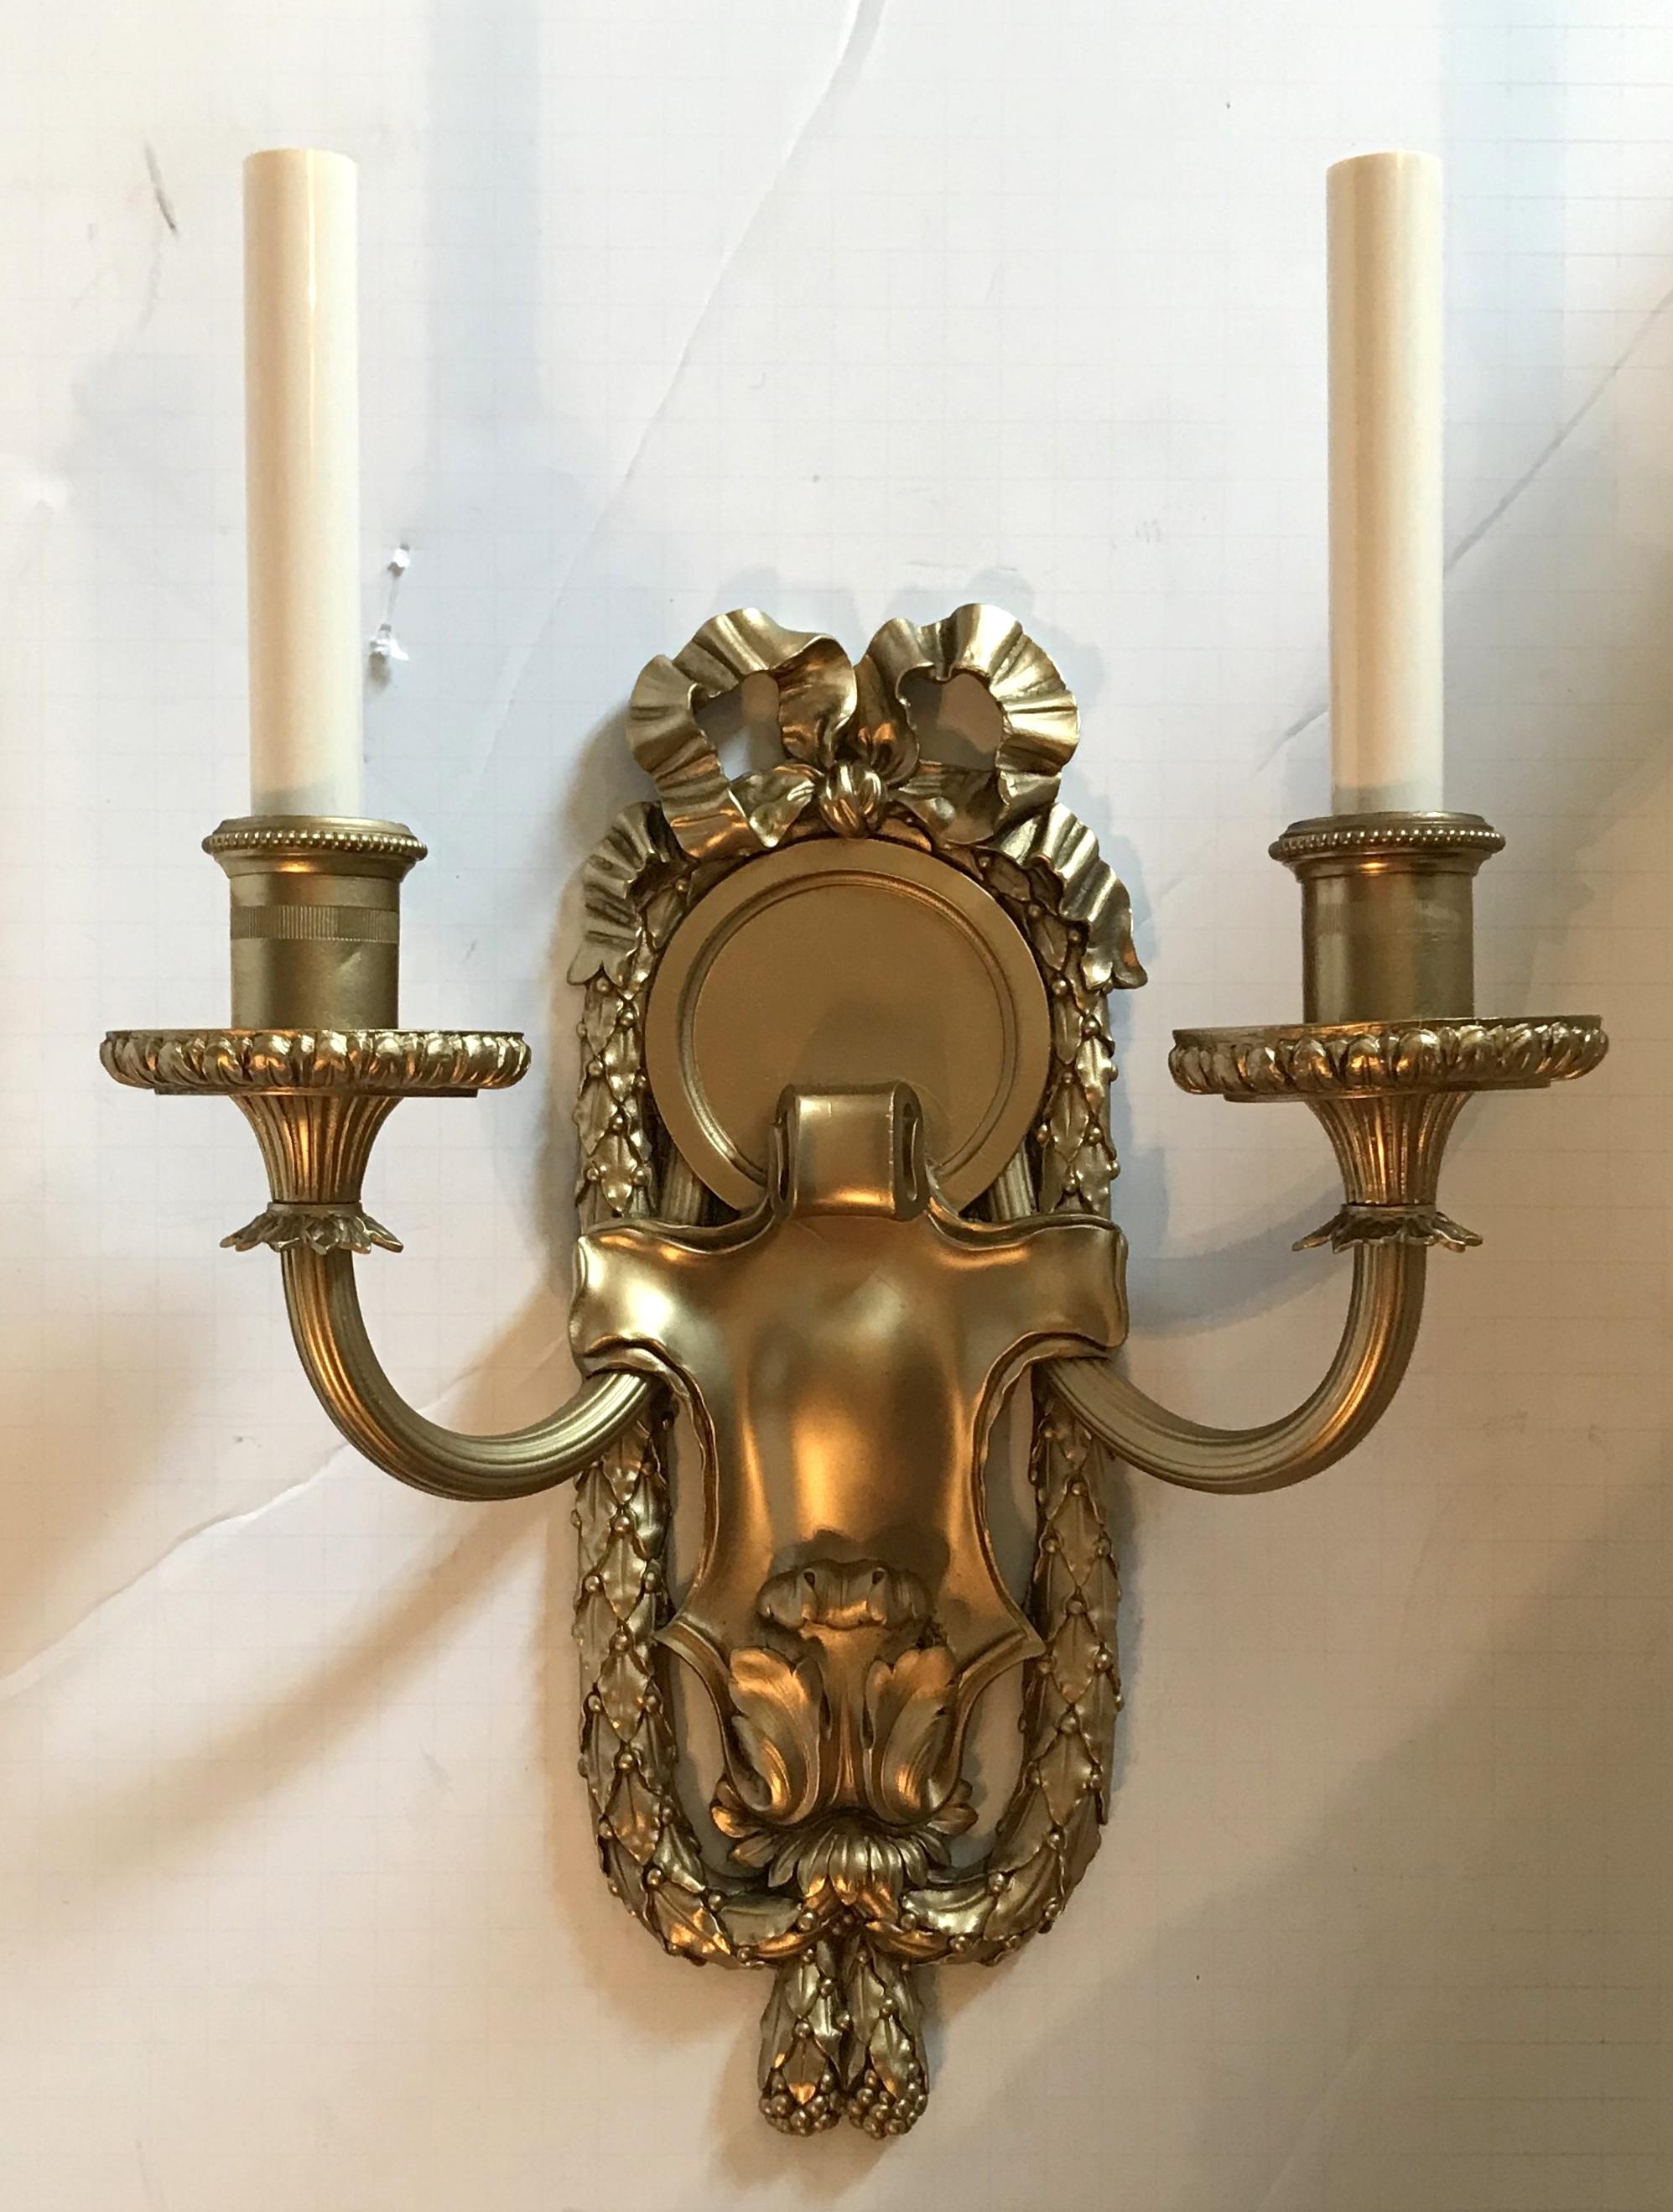 Elegant set of 5 E.F. Caldwell marked bronze sconces with embellished bow top and framed with filigree draping. With a softly aged gilt bronze patina, the sconces are set off with a wonderful center medallion, the two fluted arms, floral decorated